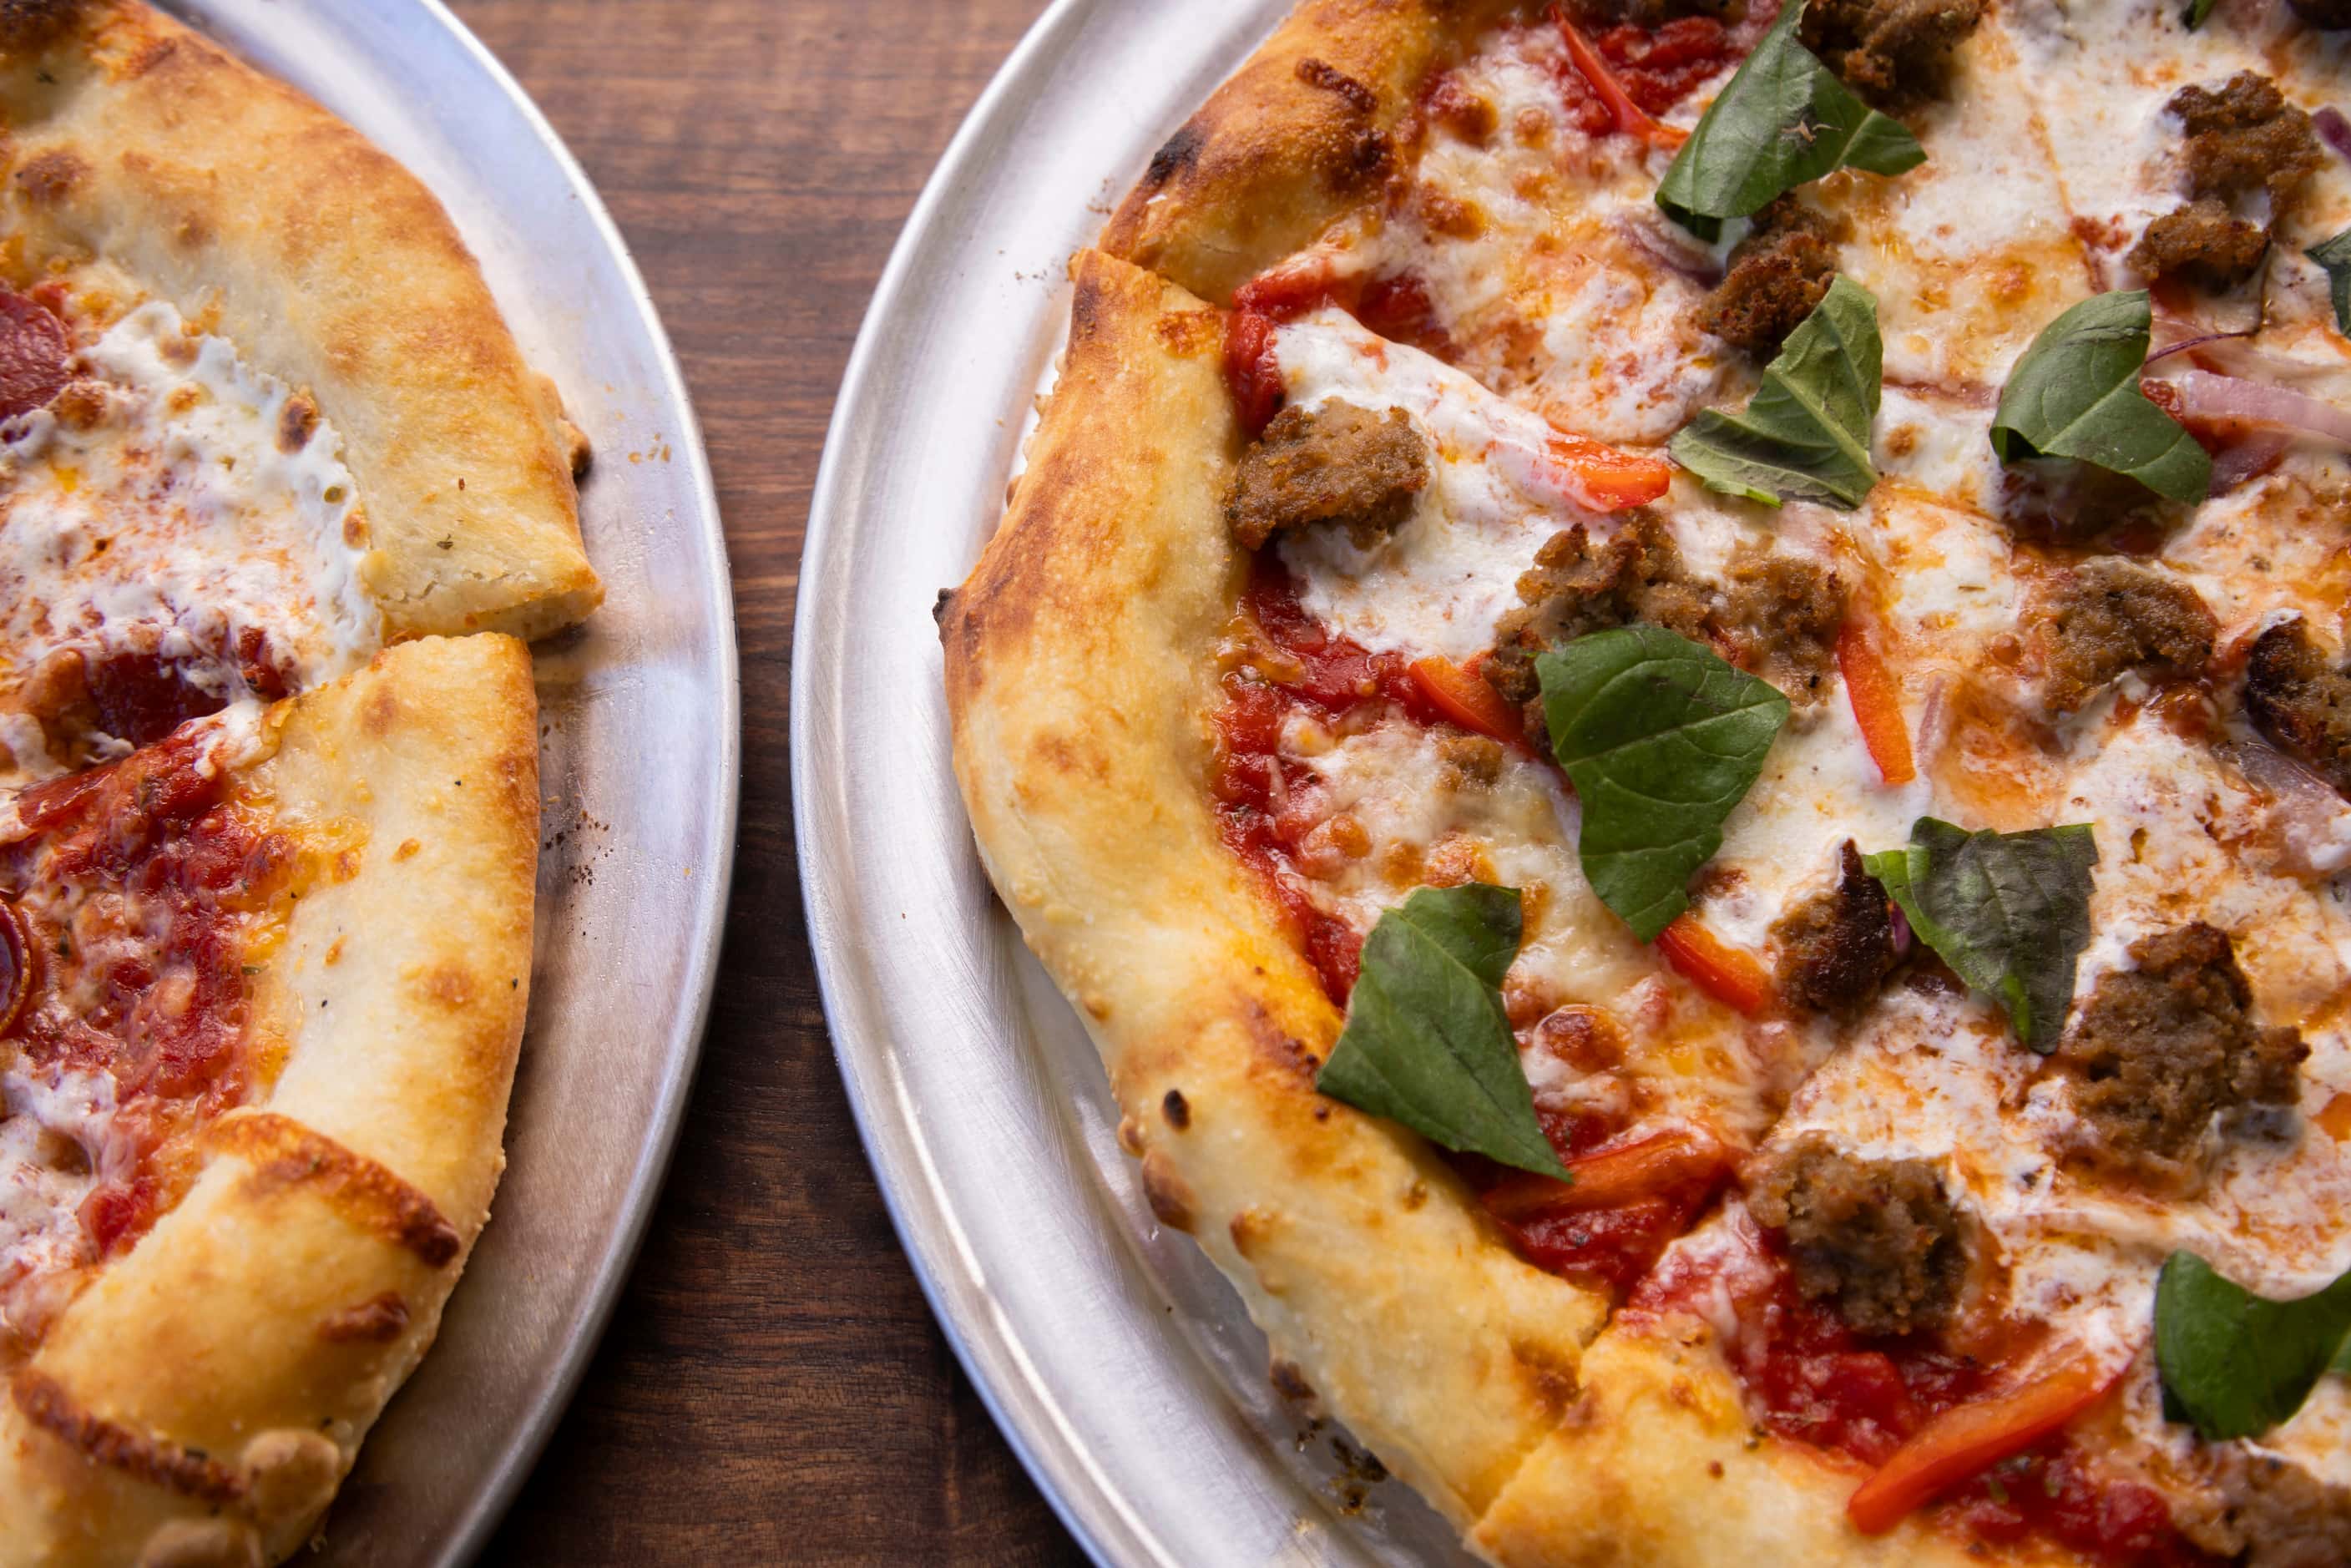 The Meatball Pizza (right) served at the Wriggly Tin, a new bar near Fair Park, in Dallas on...